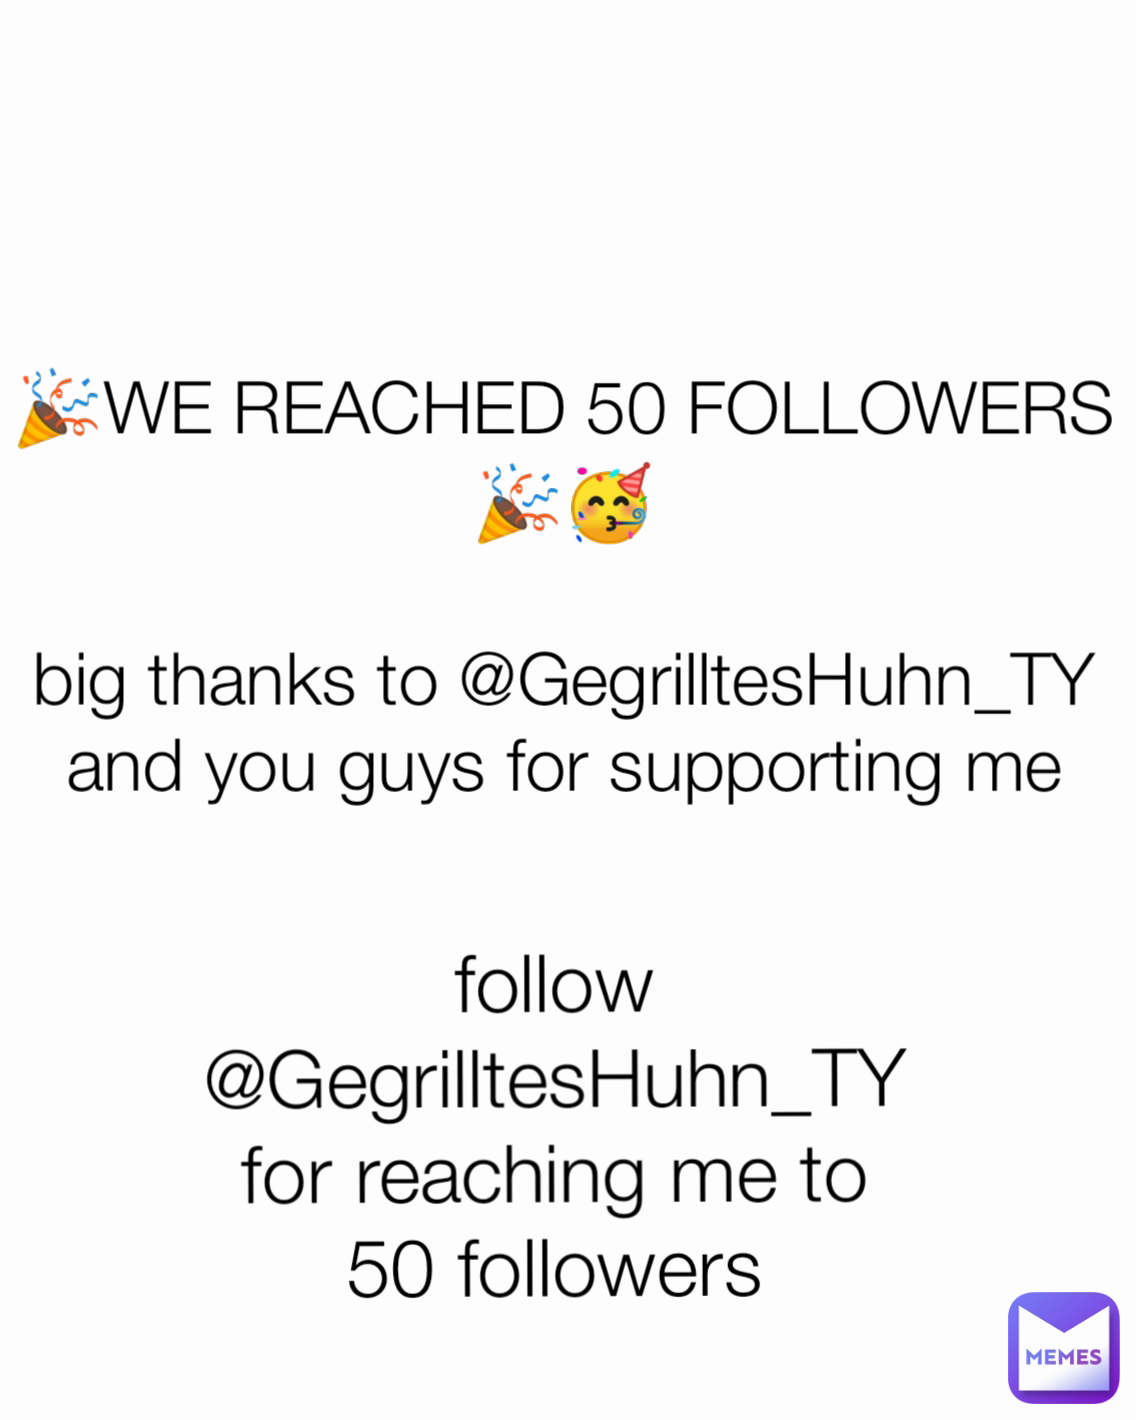 🎉WE REACHED 50 FOLLOWERS🎉🥳

big thanks to @GegrilltesHuhn_TY and you guys for supporting me follow @GegrilltesHuhn_TY for reaching me to 50 followers